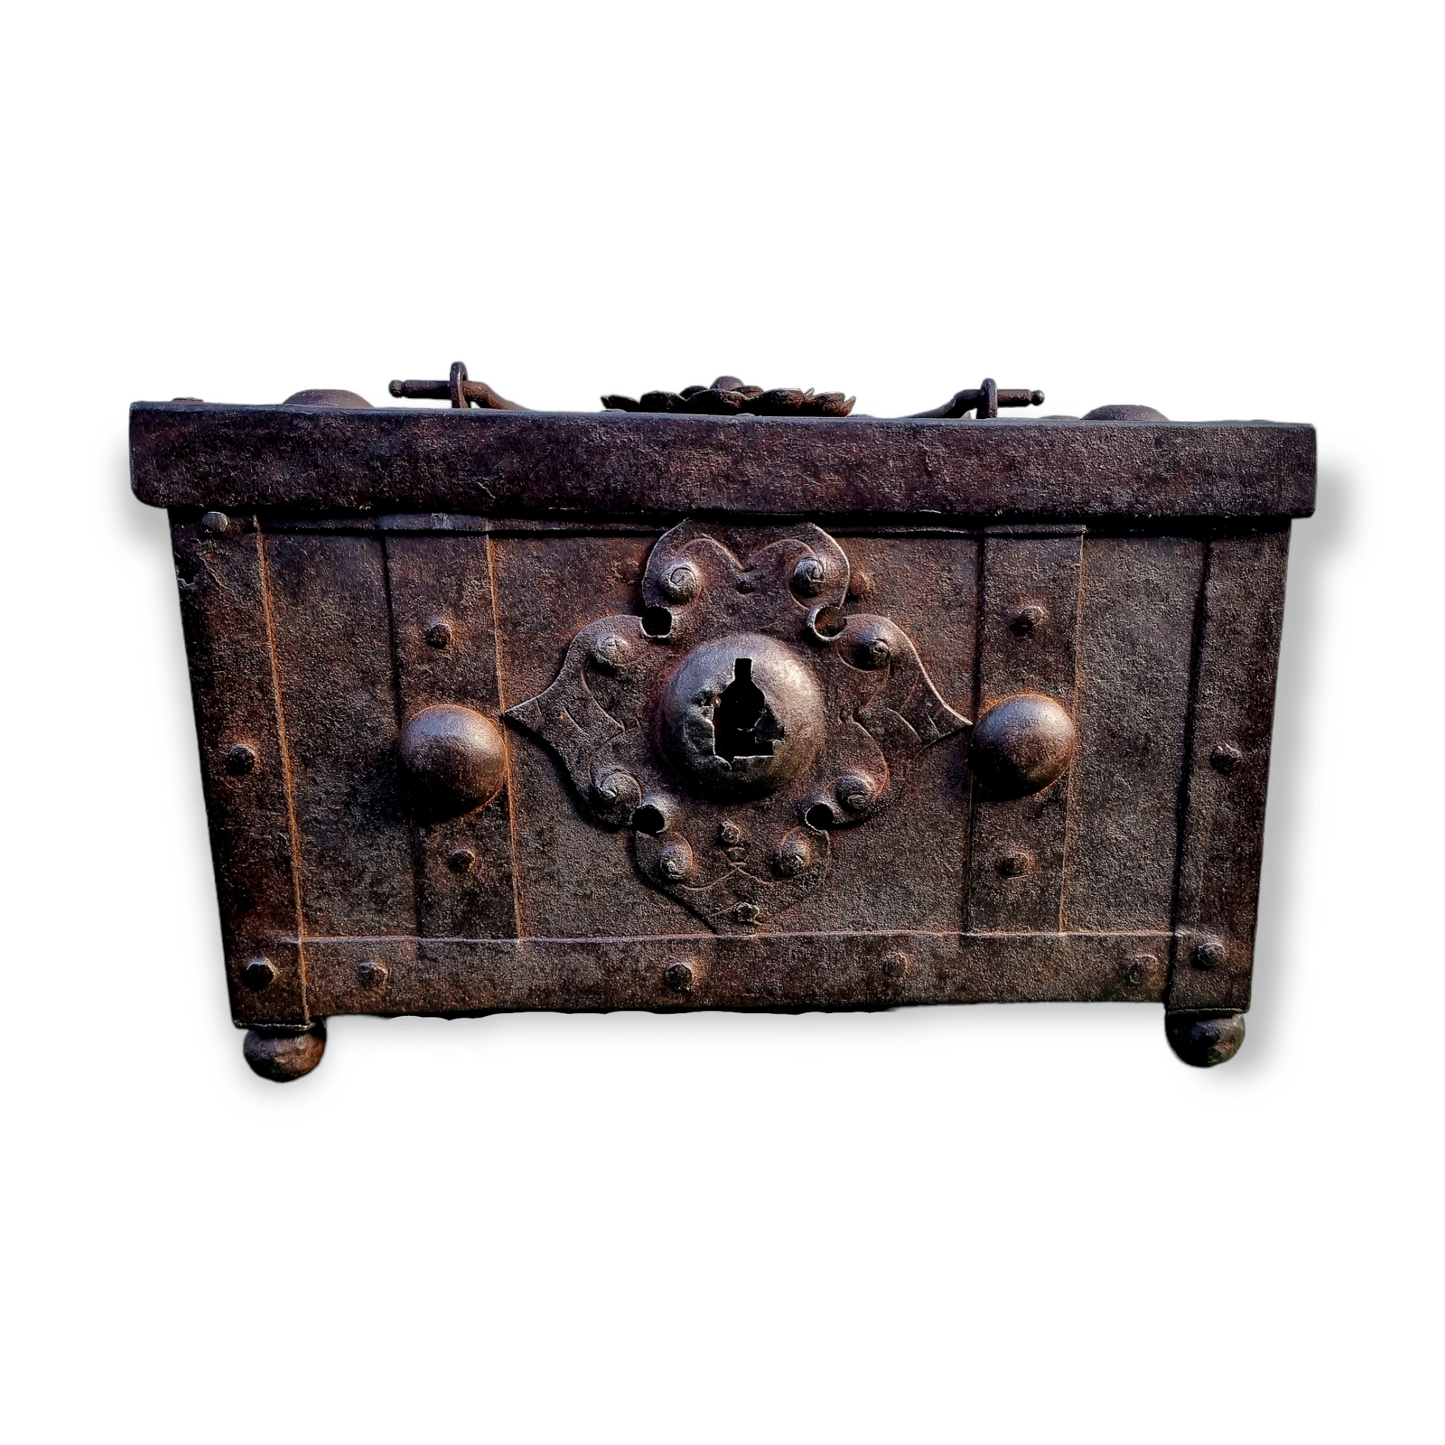 Early 17th Century German Antique Iron Nuremberg-Made Miniature Table Casket / Strongbox